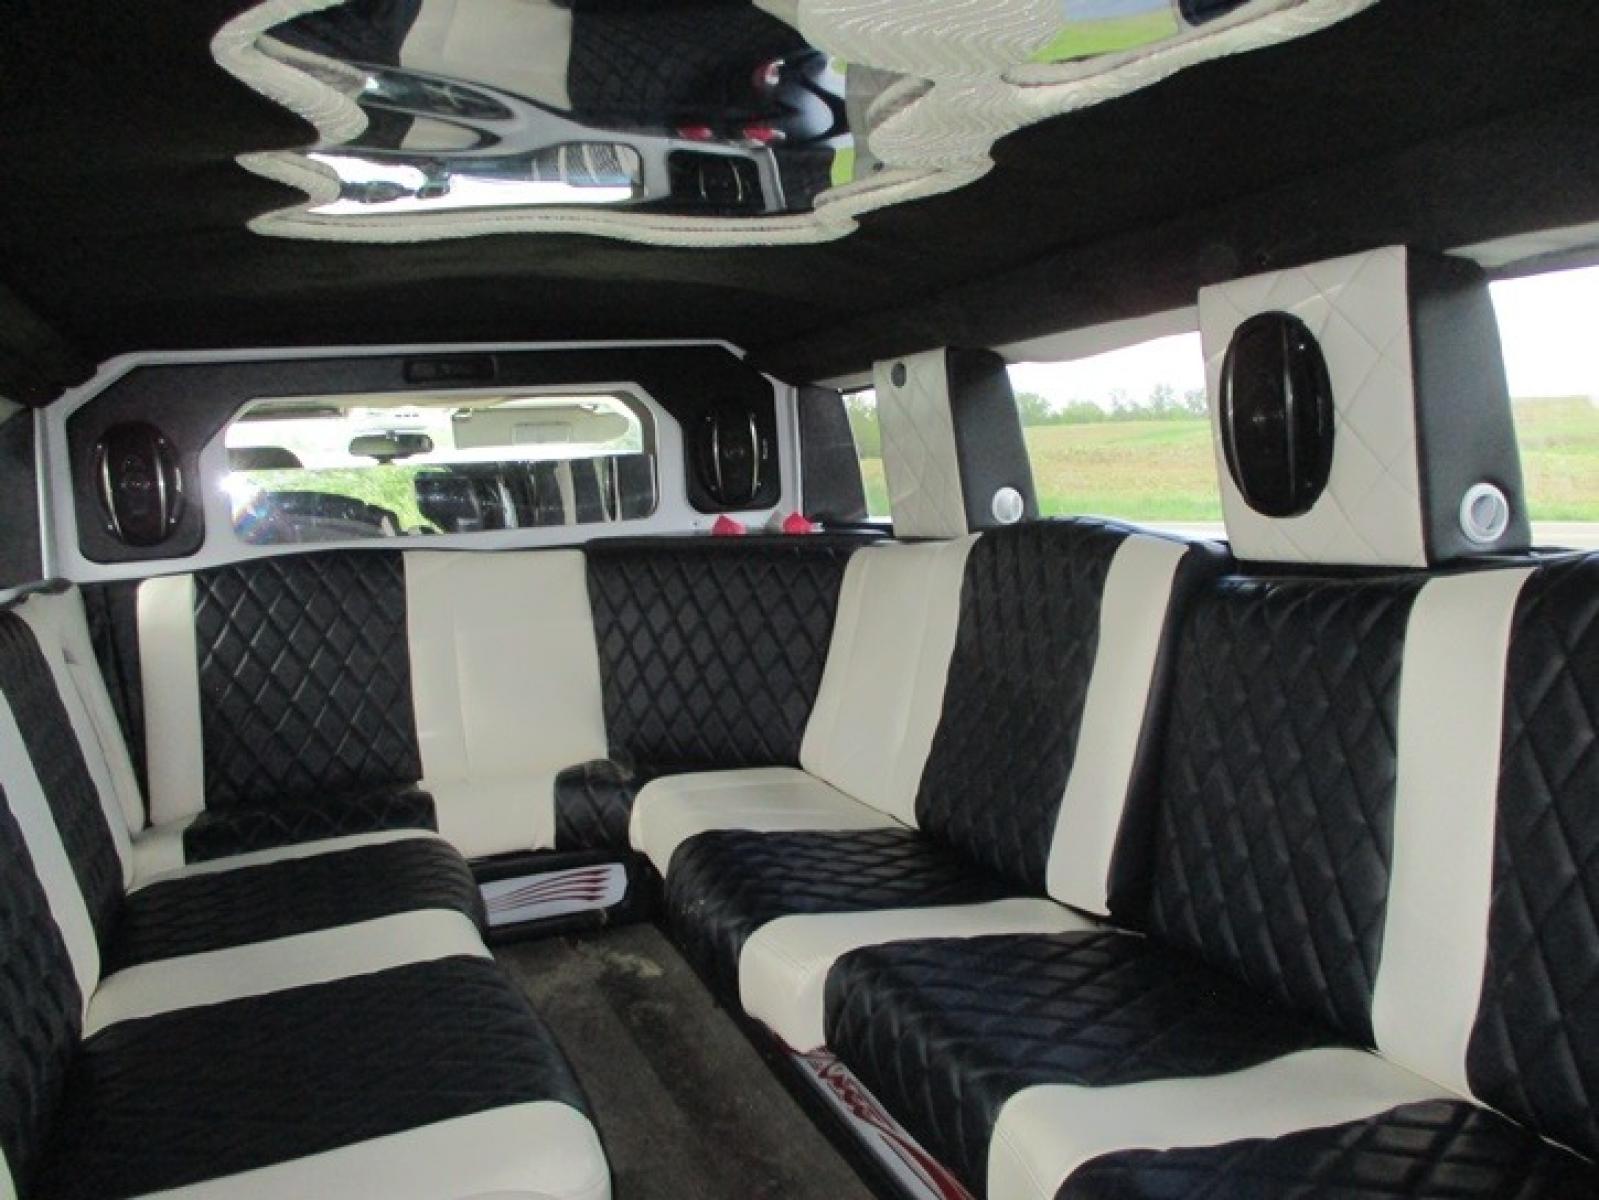 2005 White /White/Black Hummer H2 , located at 1725 US-68 N, Bellefontaine, OH, 43311, (937) 592-5466, 40.387783, -83.752388 - 2005 Hummer H2 175" SUV VIP Limousine, White w/White/black leather interior, Front/Rear Ait, Flat Screens, AM/FM/CD reconditioned Interior, LOADED - Photo #4